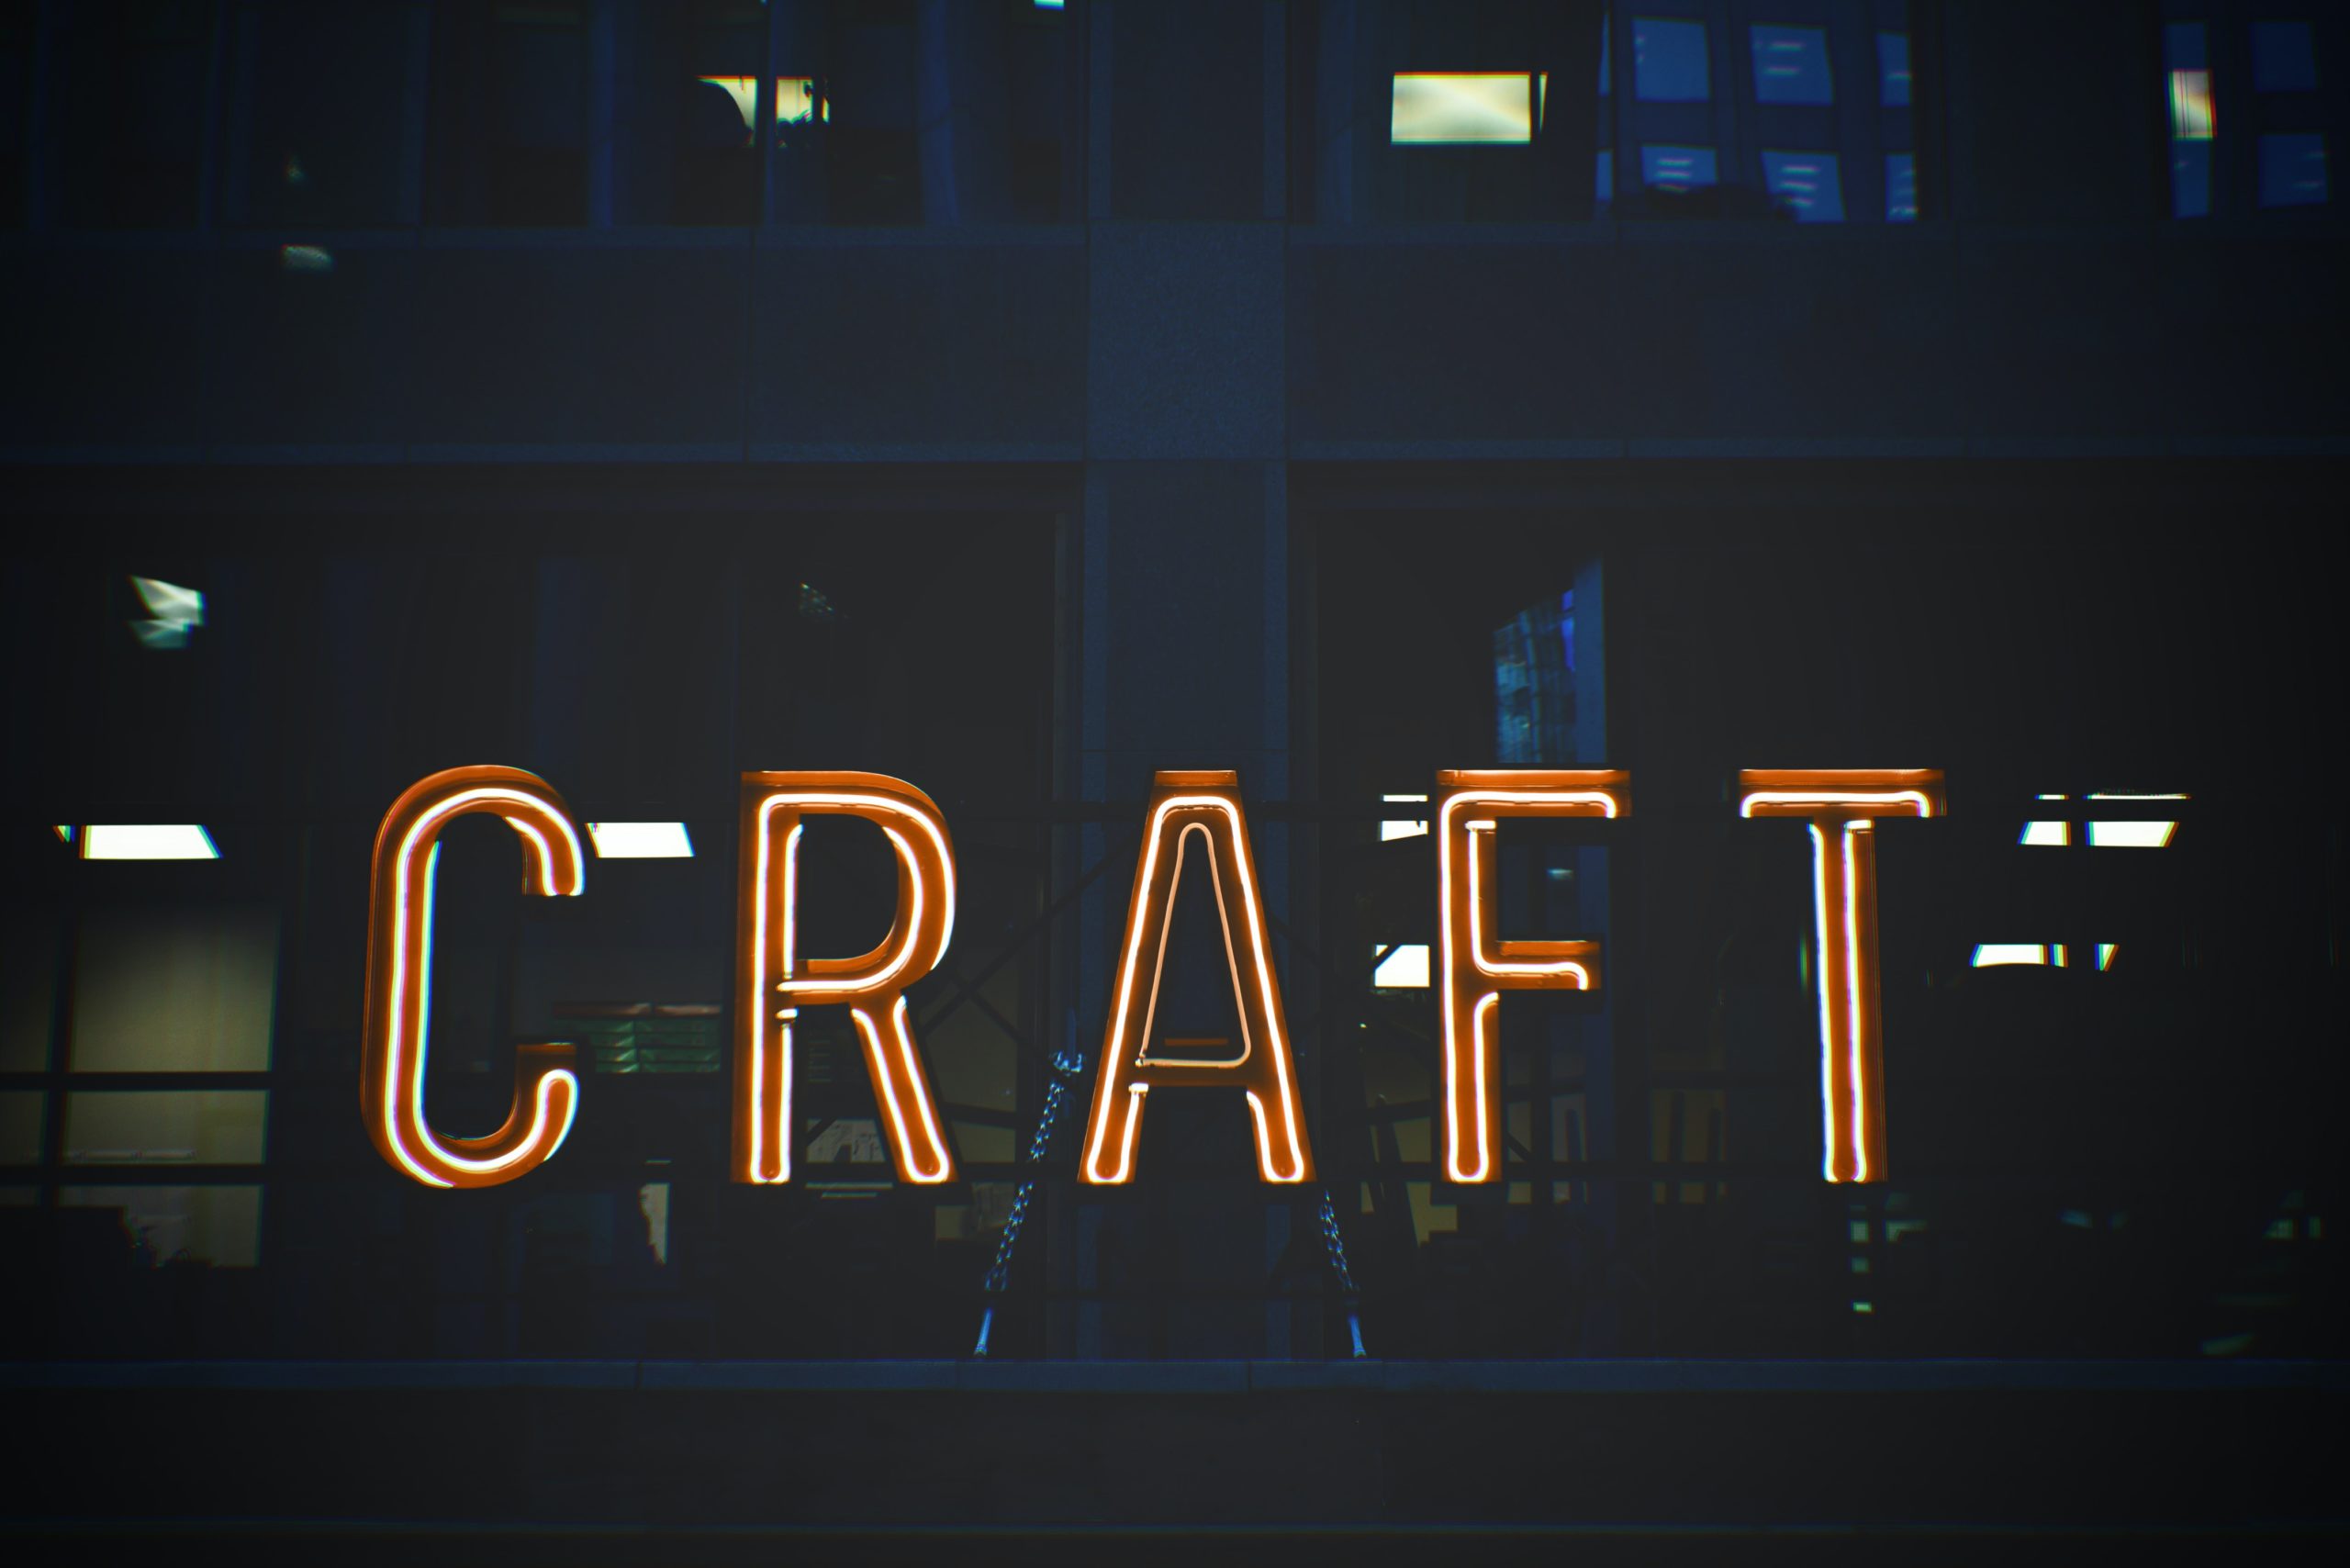 The word 'craft' in neon sign lighting